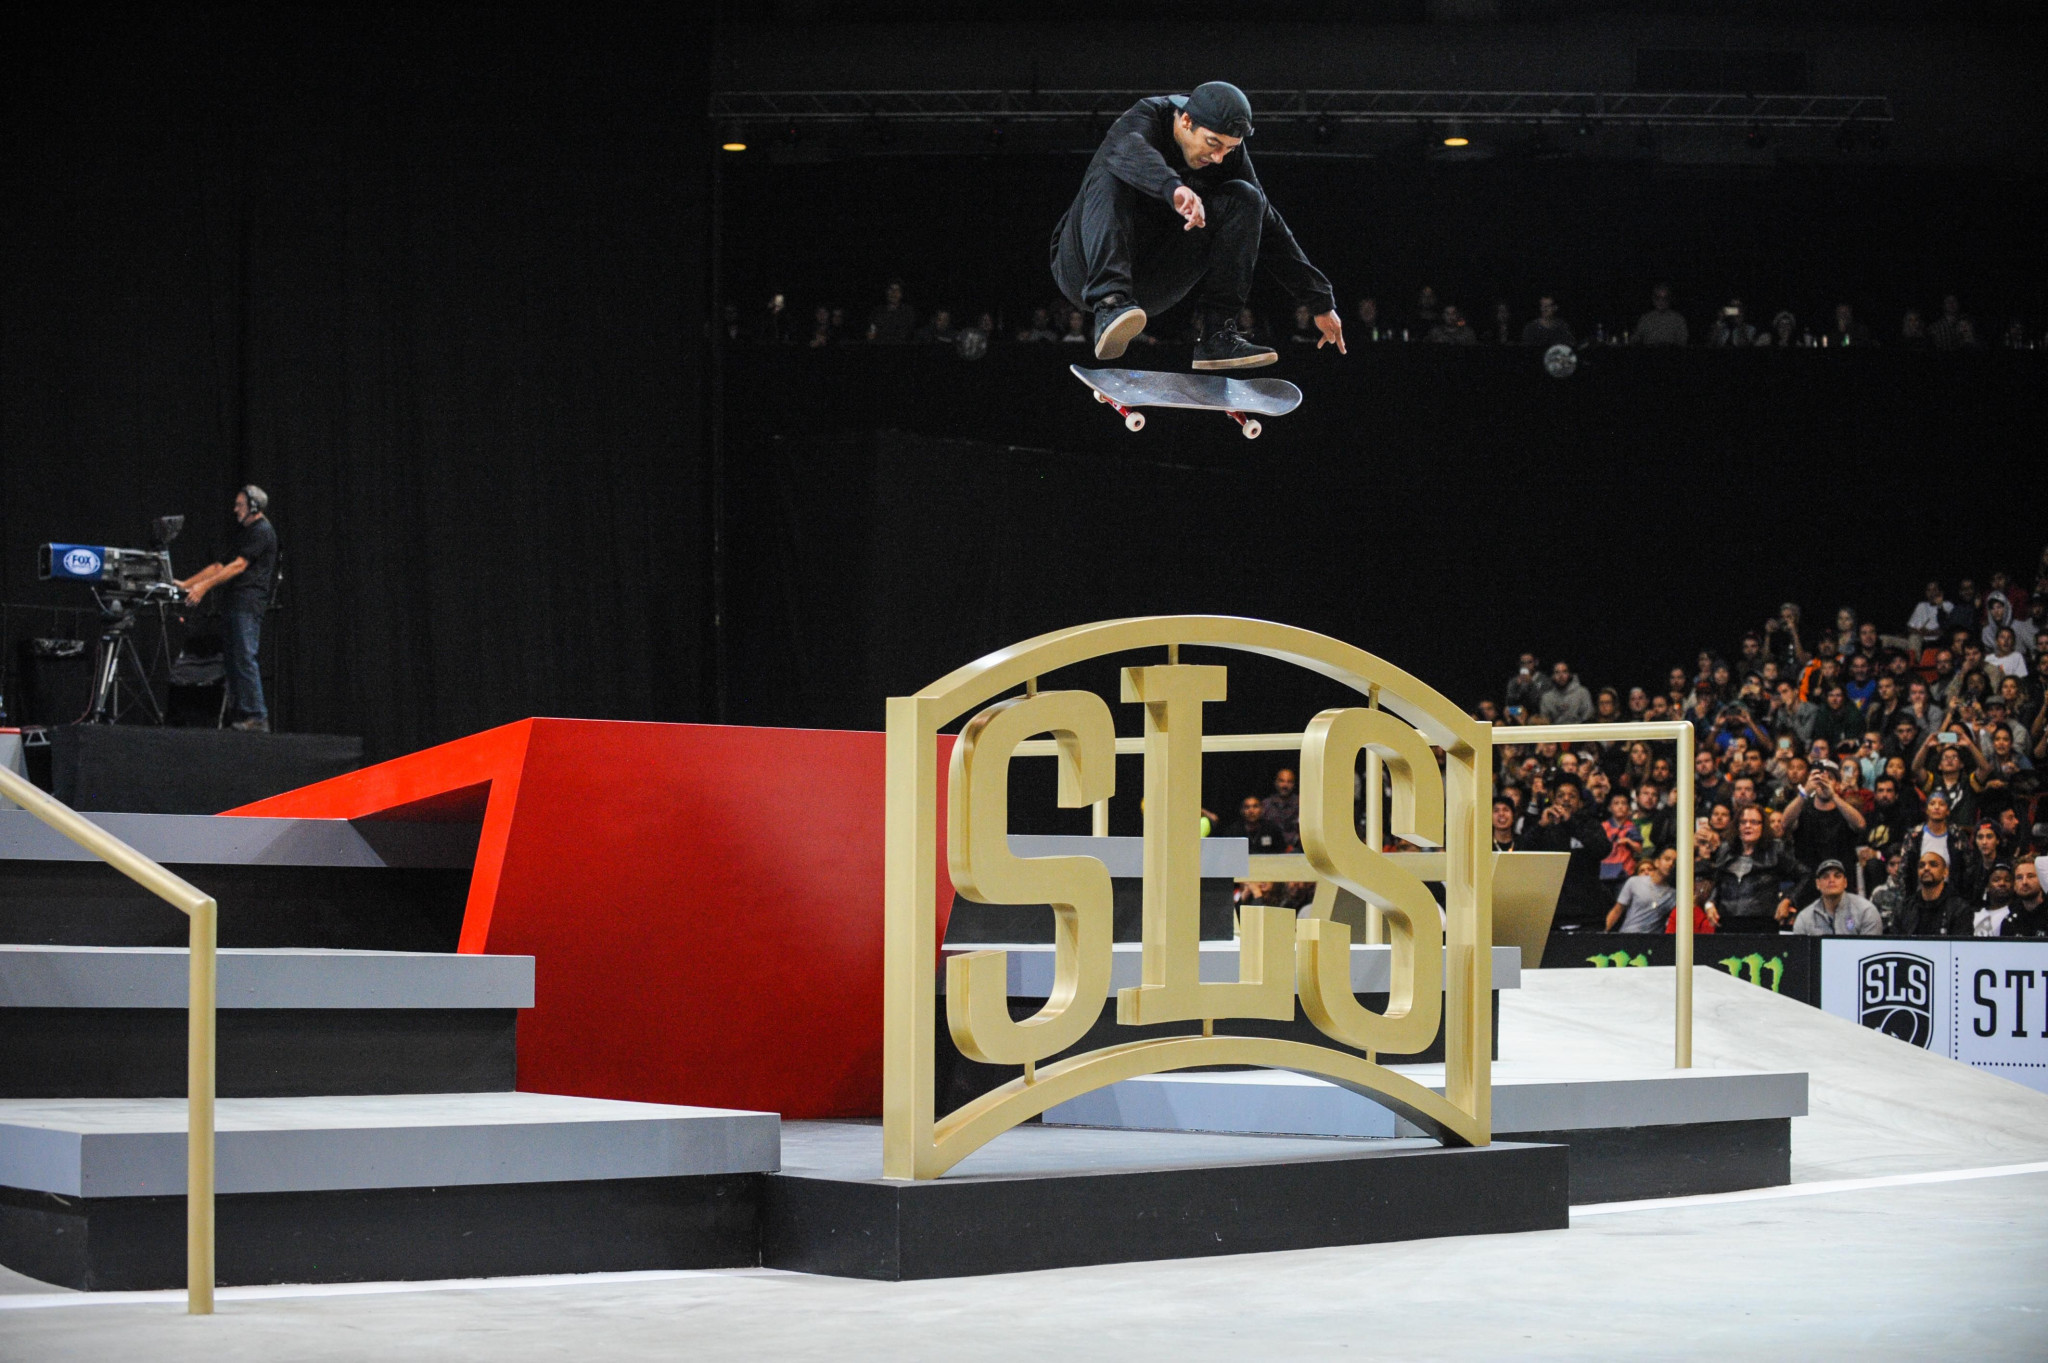 The 2022 Street League Skateboarding Championship Tour is set to begin in Jacksonville on July 16 and 17 ©SLS